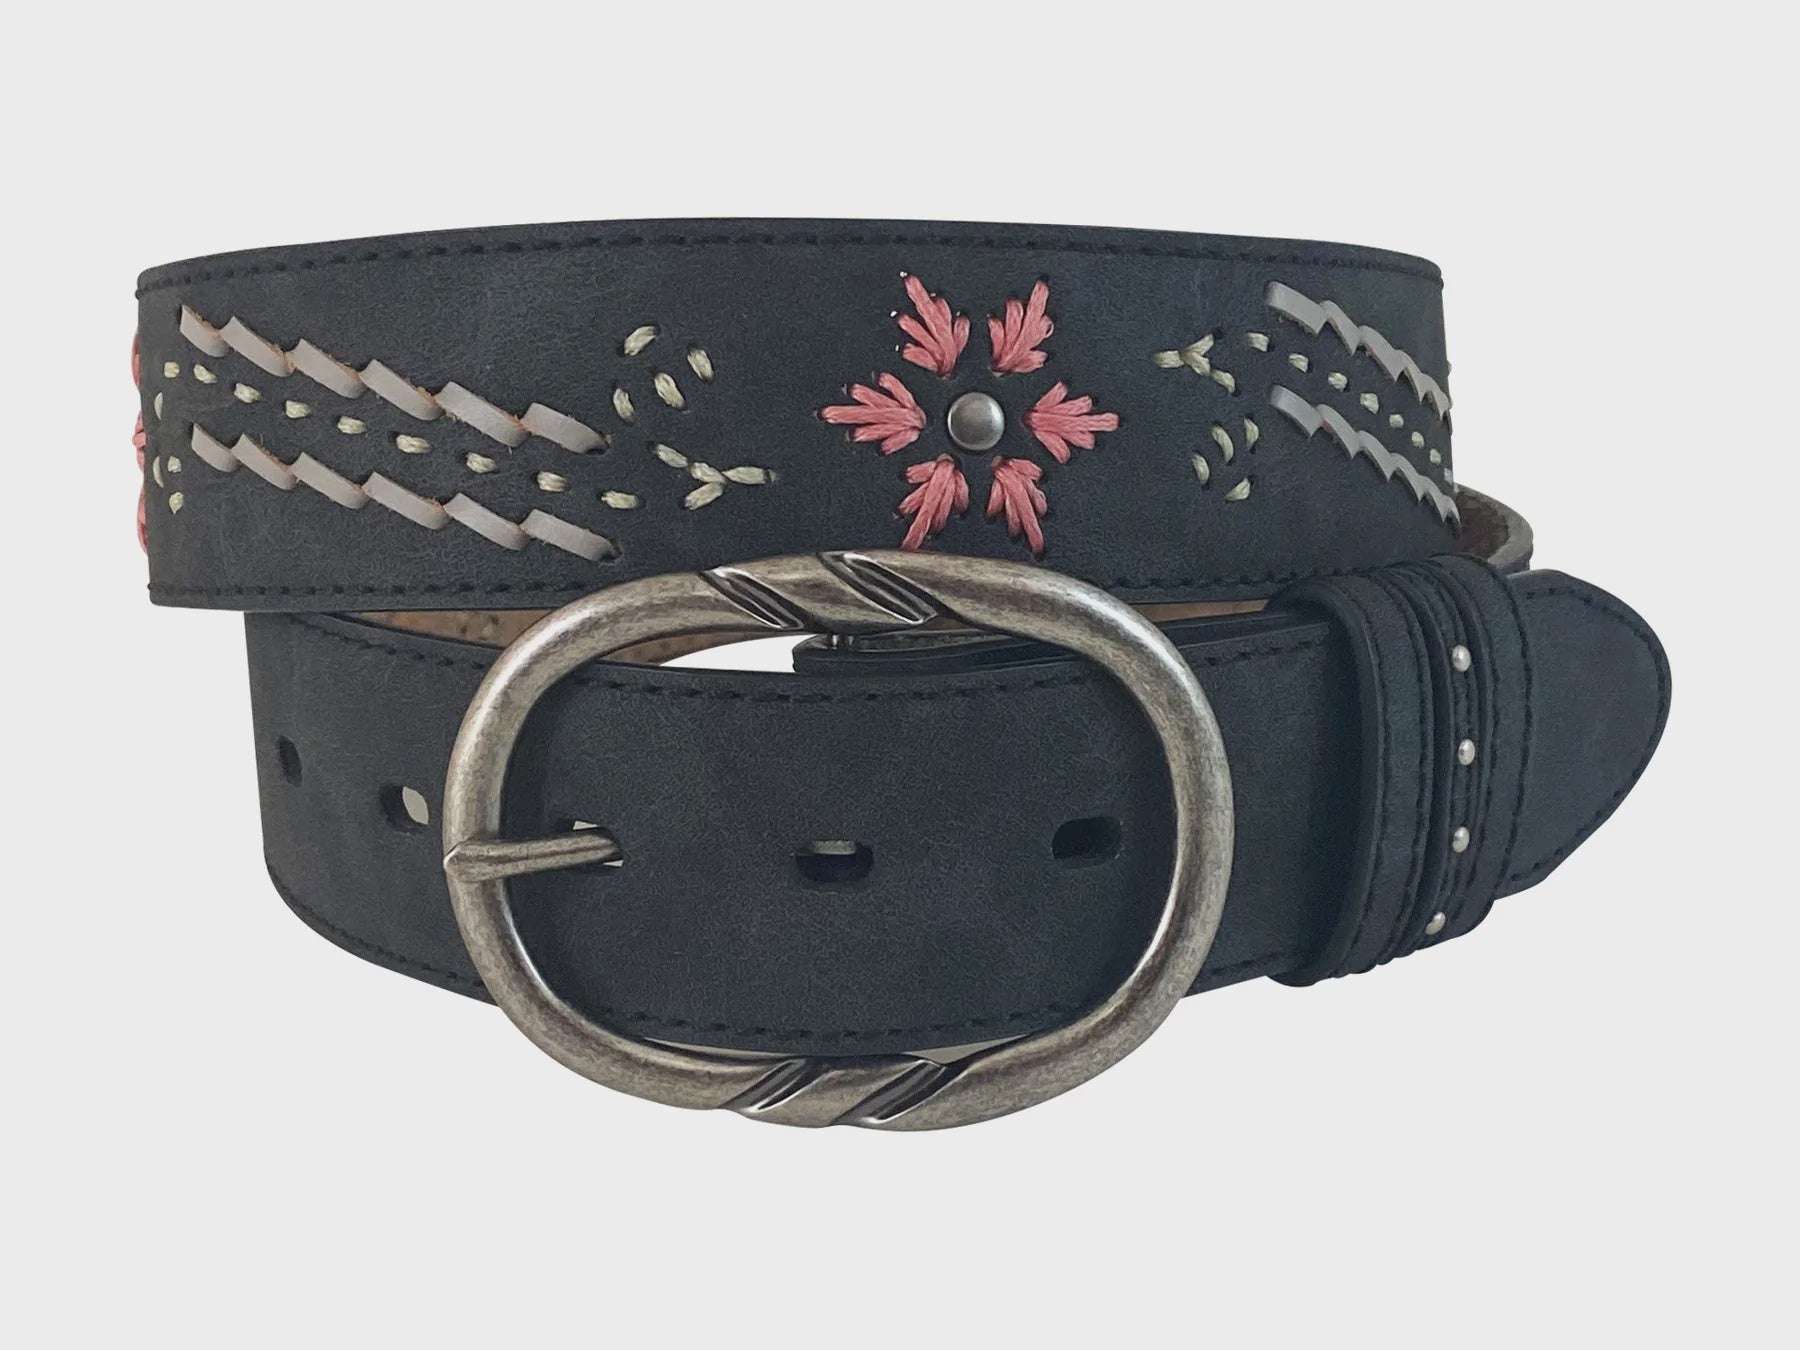 Roper Womens Belt  1.1/2'' Distressed Leather Embroidered Black